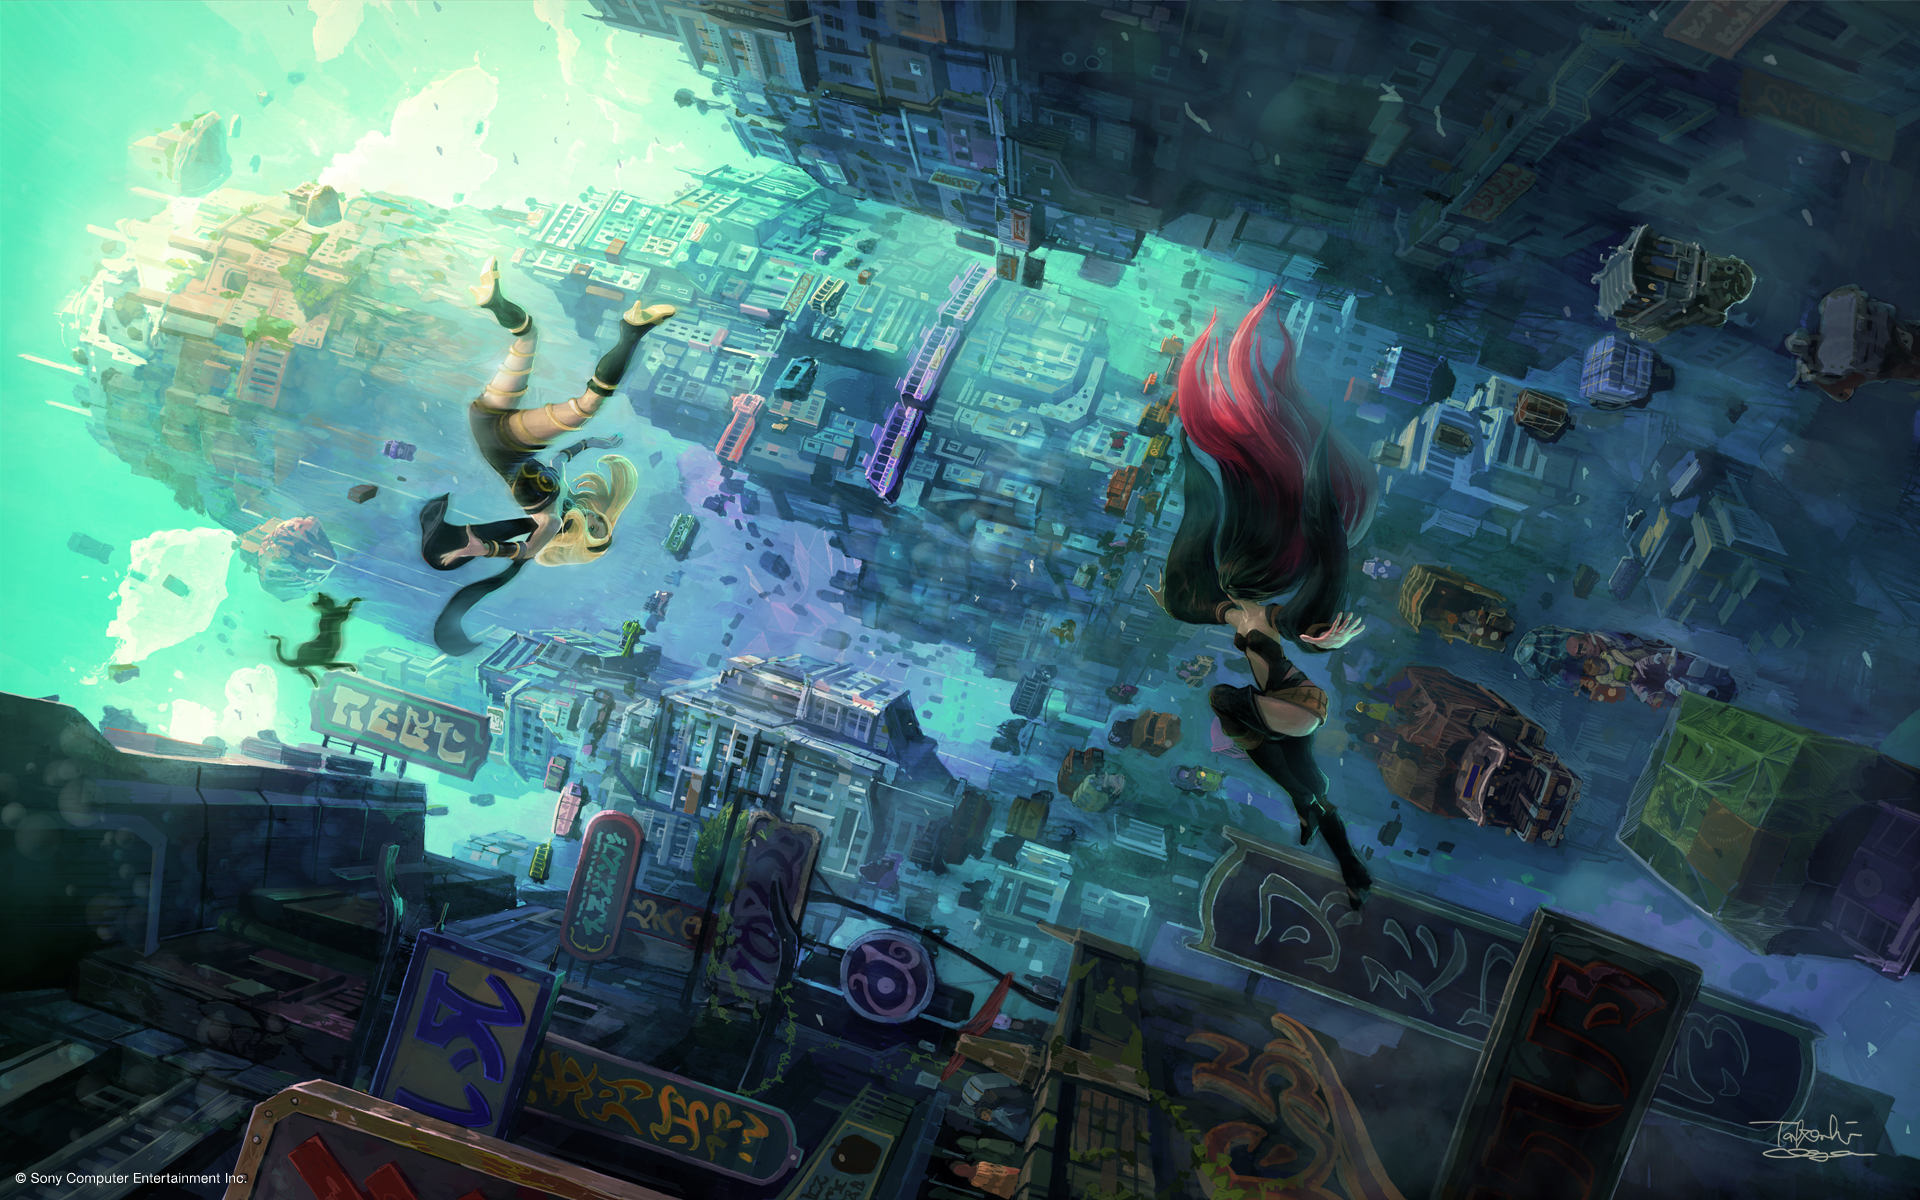 TGS 2013: New Gravity Rush Video Teases New Game Together With